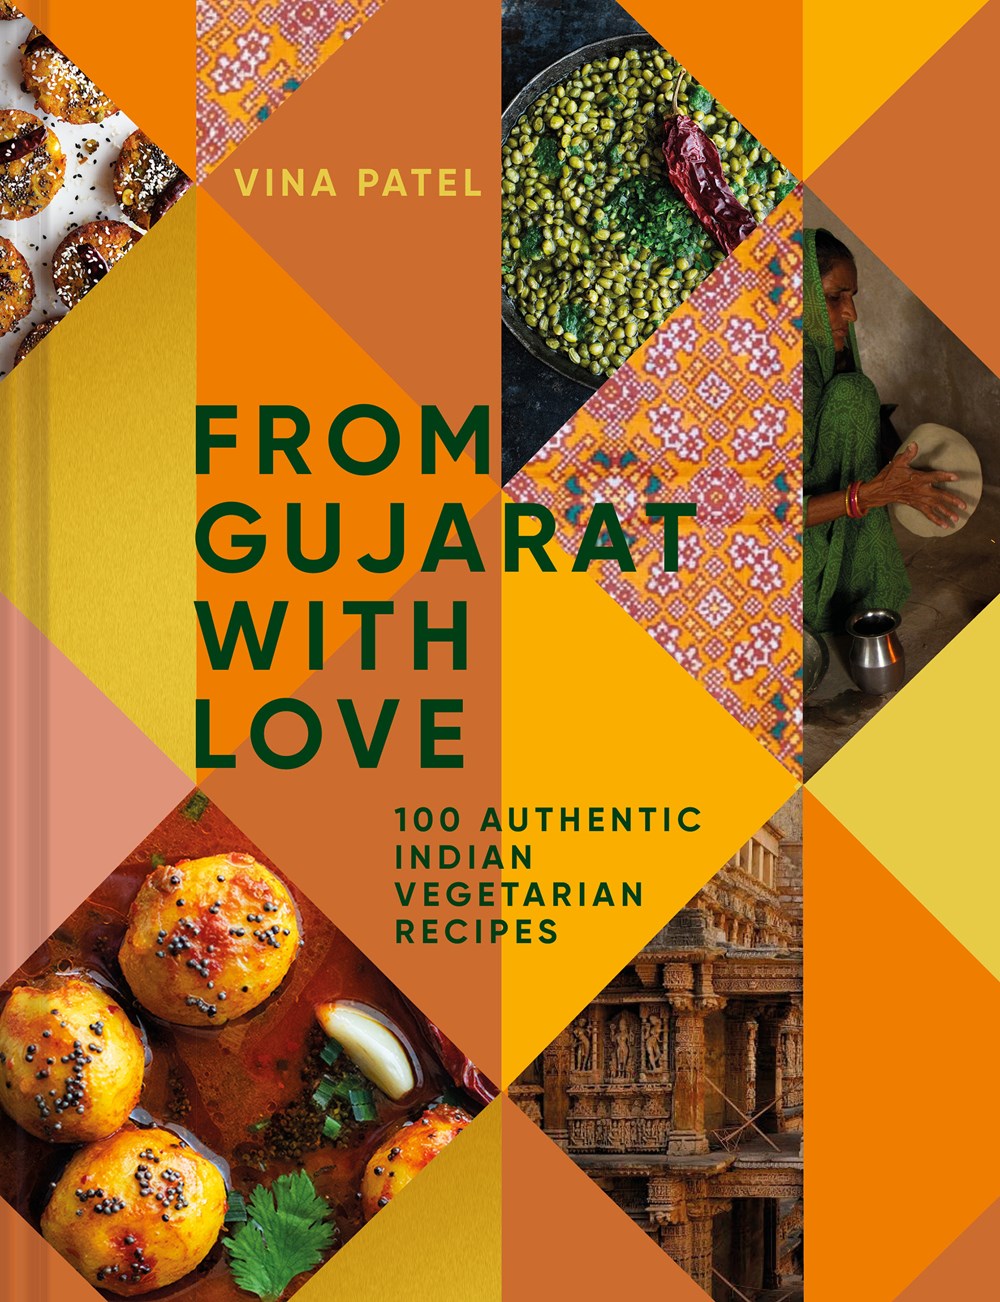 From Gujarat, With Love: 100 Easy Indian Vegetarian Recipes (Vina Patel)